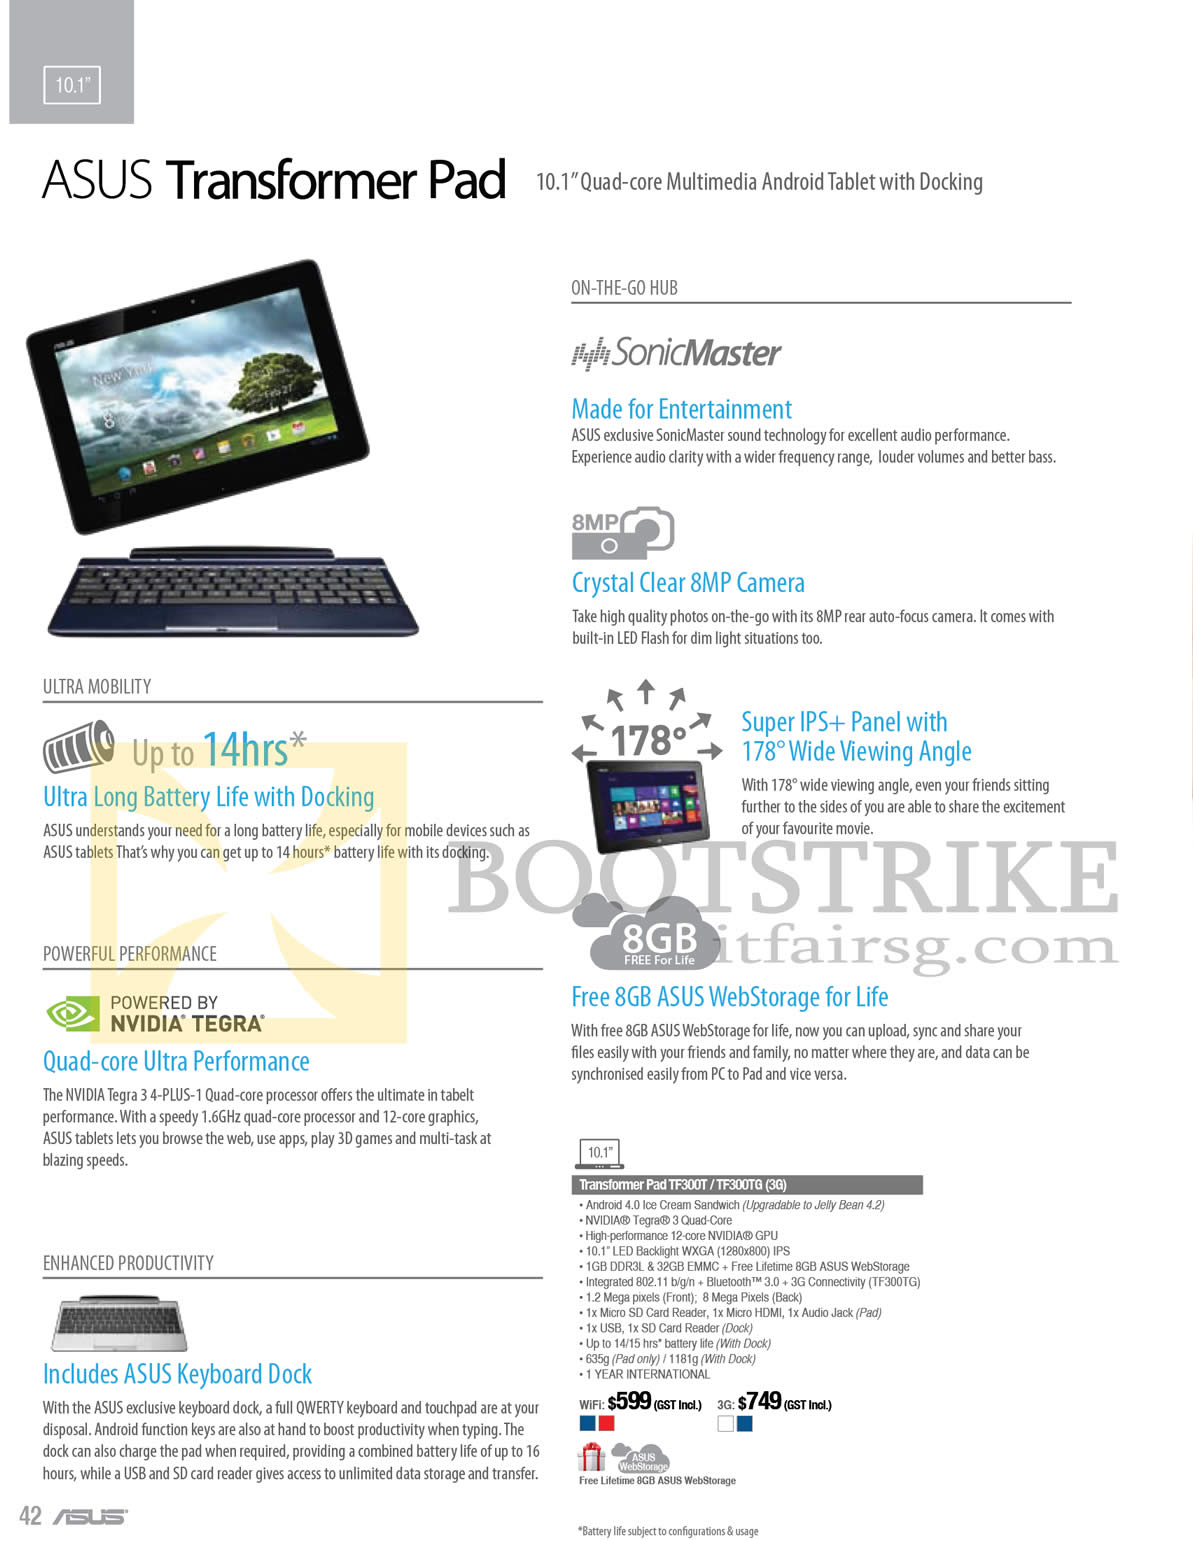 PC SHOW 2013 price list image brochure of ASUS Tablets Transformer Pad TF300T TF300TG 3G, Android